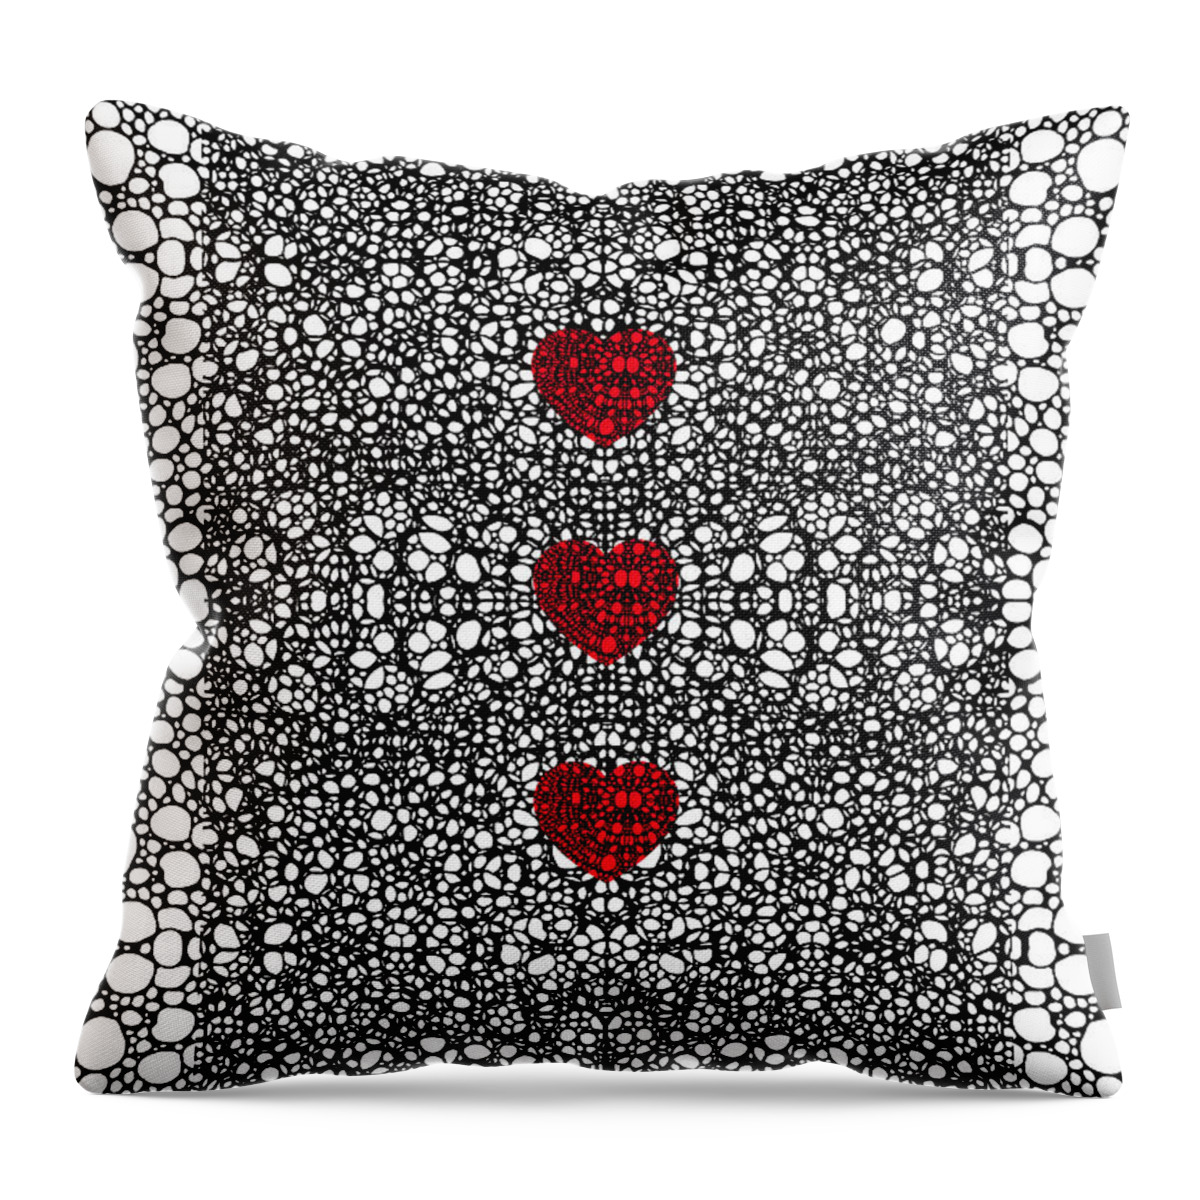 Heart Throw Pillow featuring the painting Pattern 34 - Heart Art - Black And White Exquisite Patterns By Sharon Cummings by Sharon Cummings